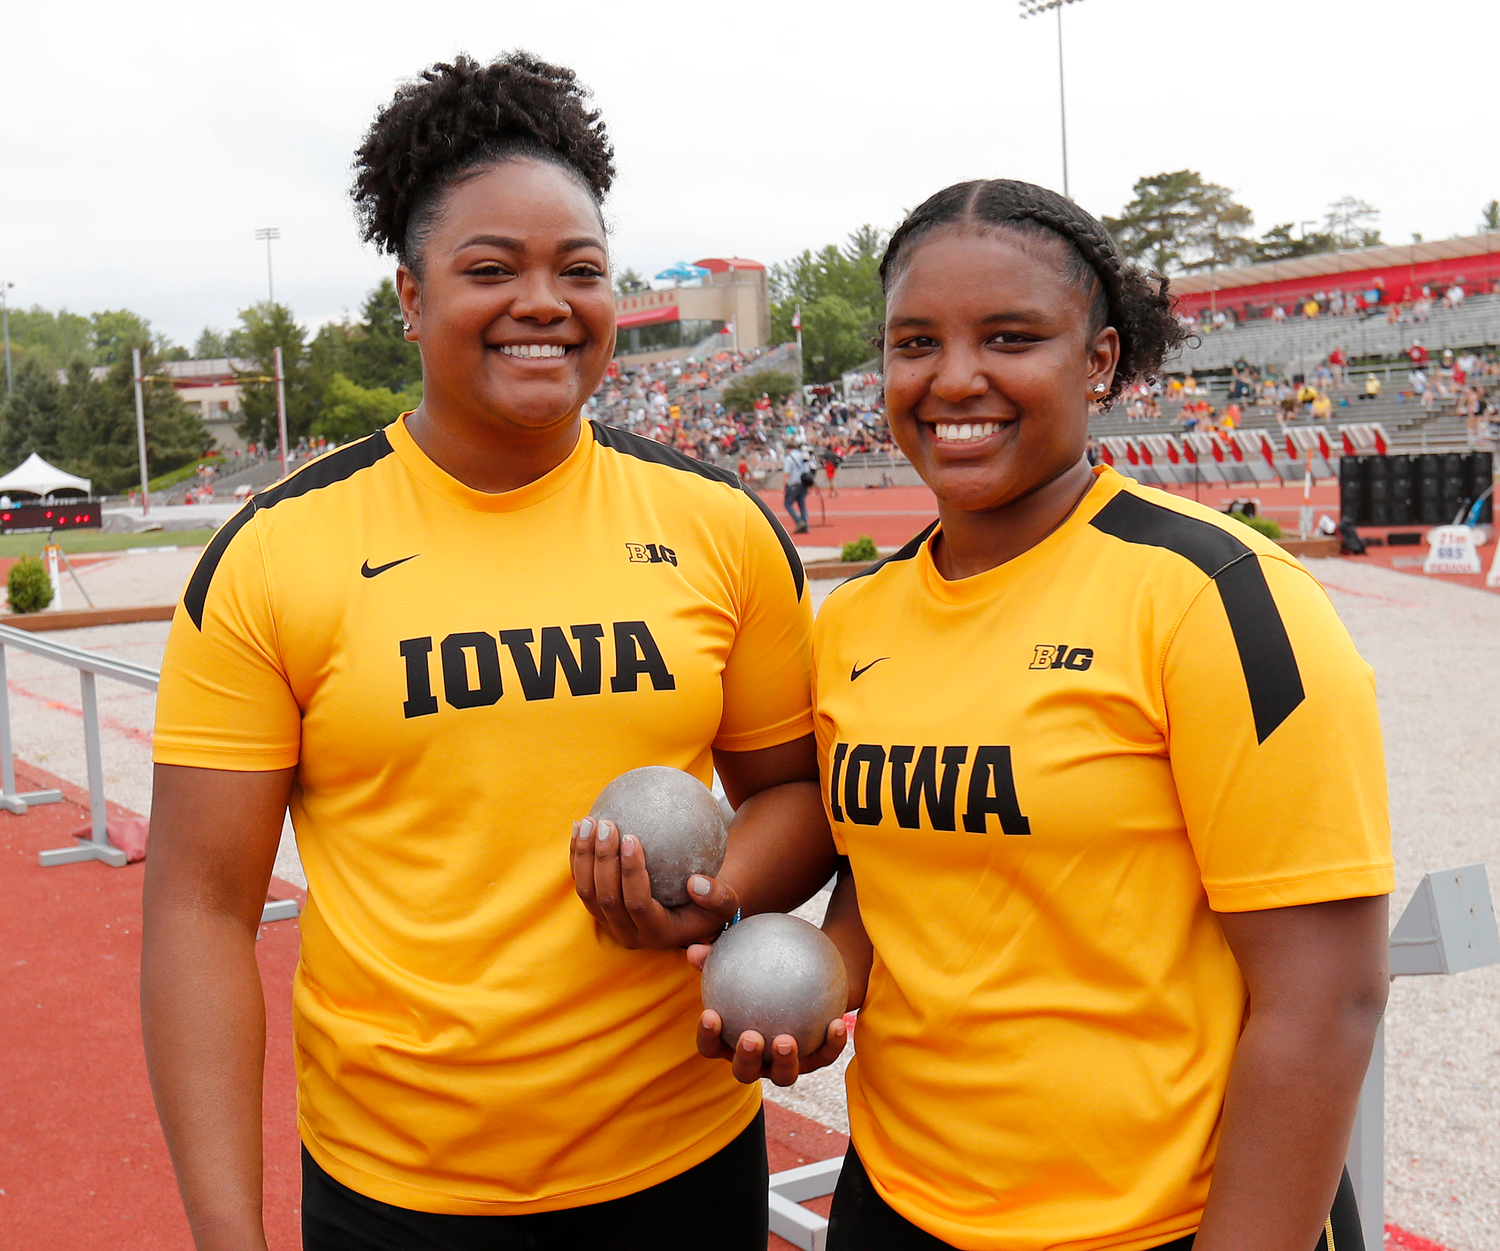 Nia Britt (right) and teammate from the Iowa Track and Field team